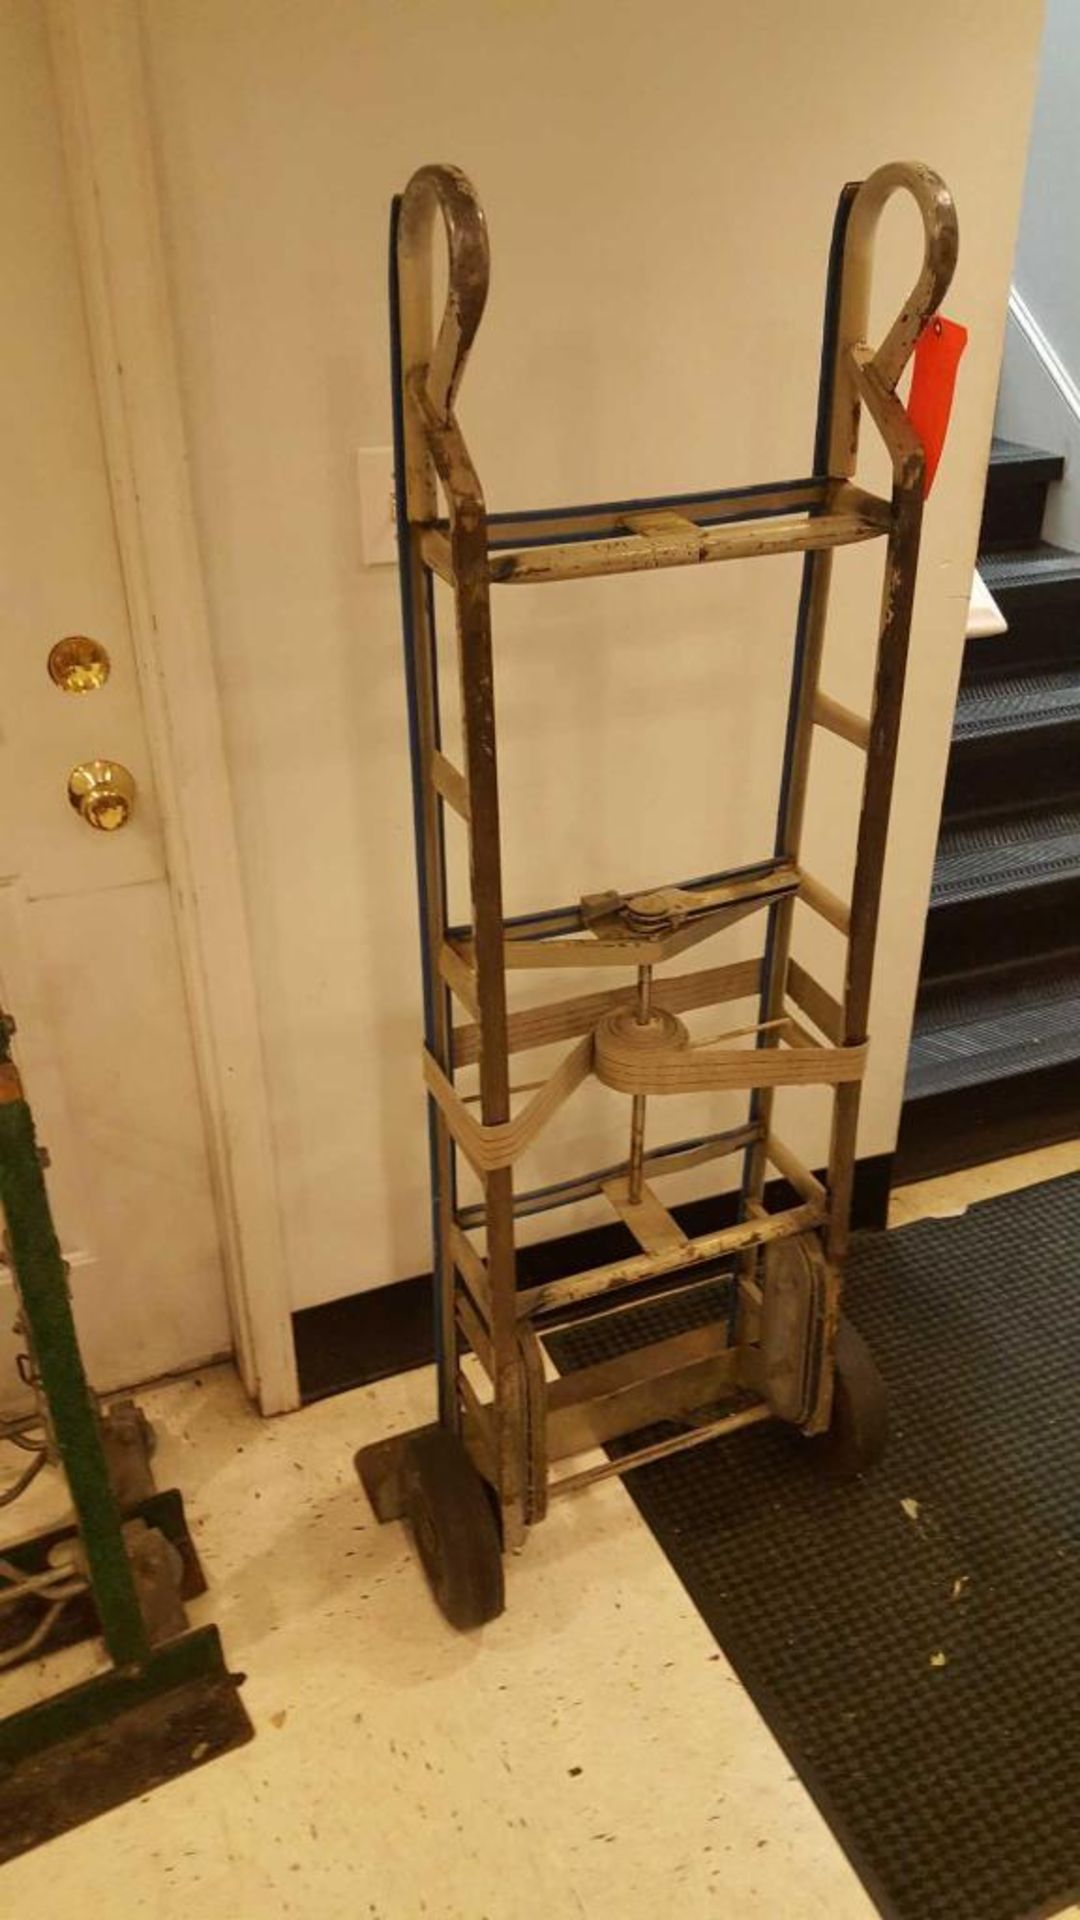 appliance dolly with ratchet strap